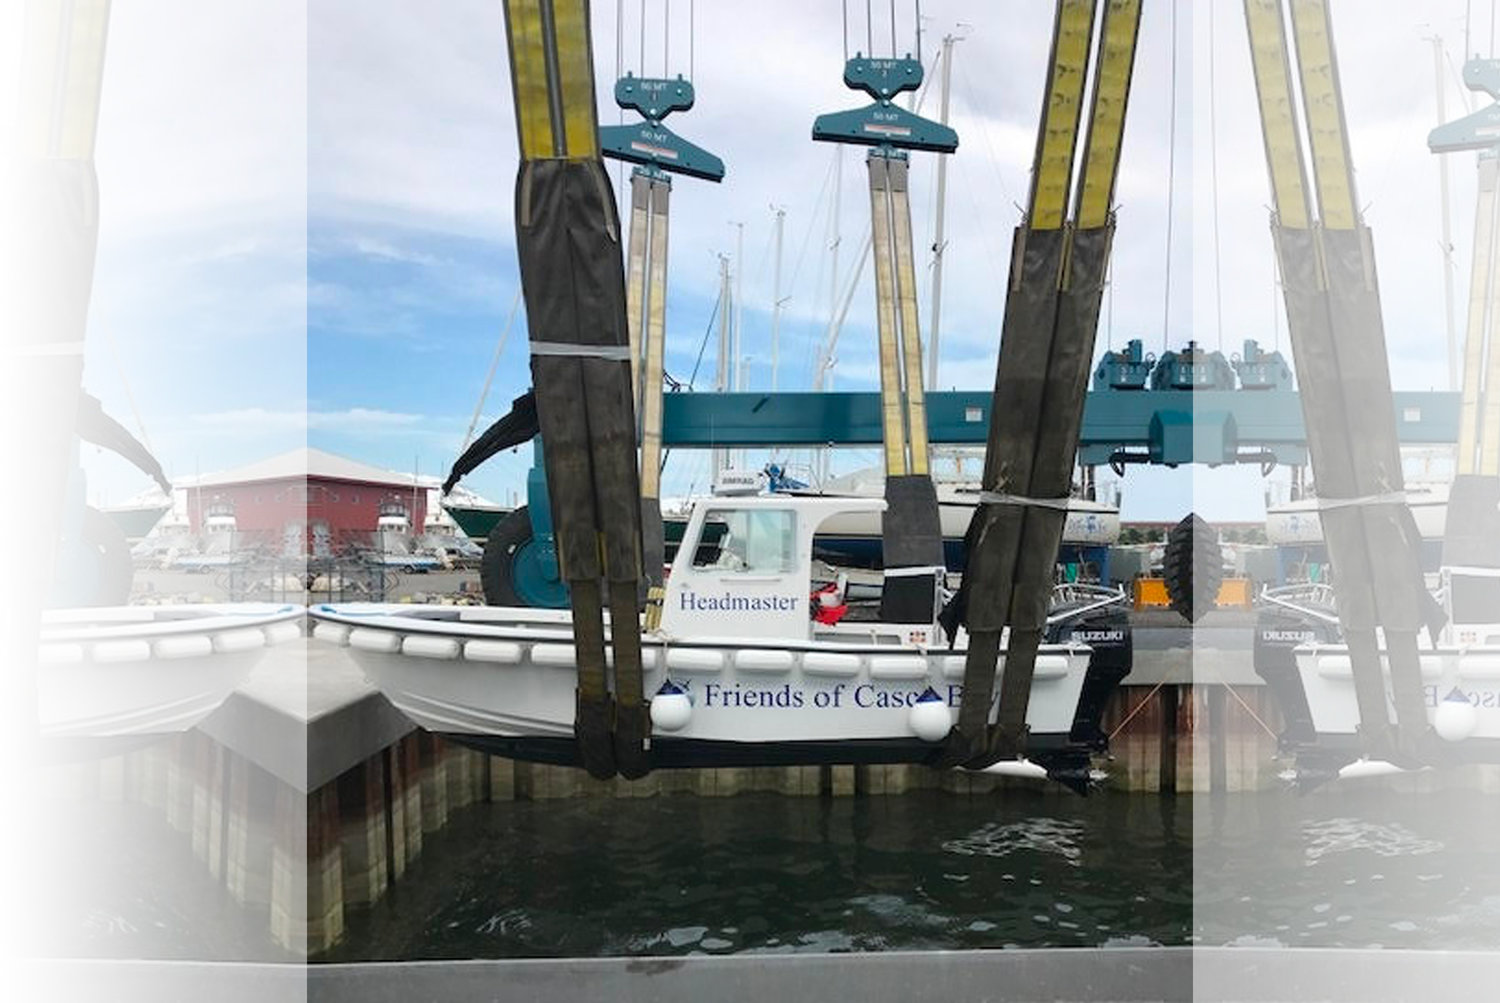 Marine Boatbuilders focuses on a very particular niche of the industry, manufacturing custom pumpout boats, work boats, patrol boats, and floating restrooms